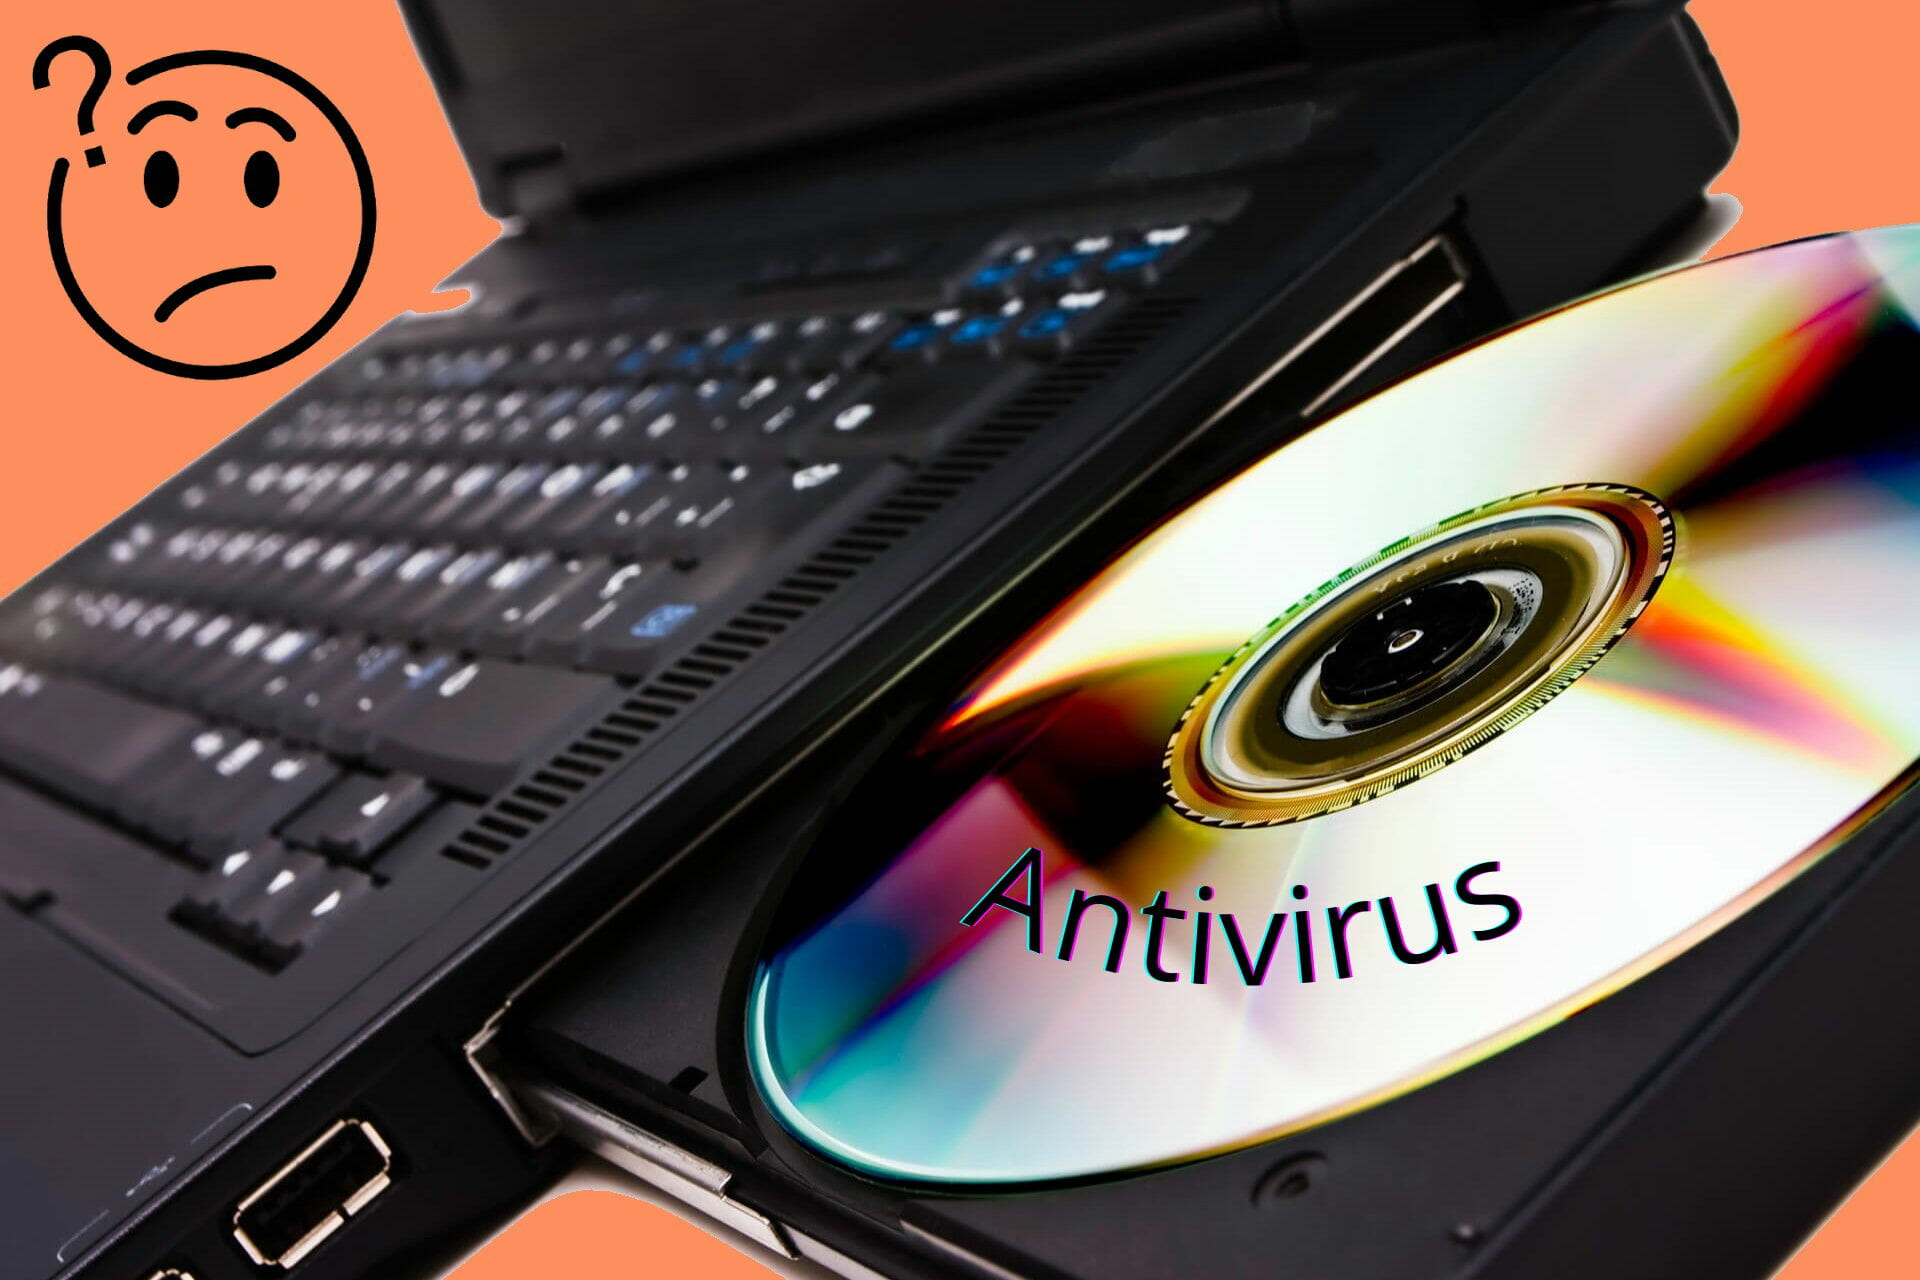 How can I install antivirus on my laptop without optical drive